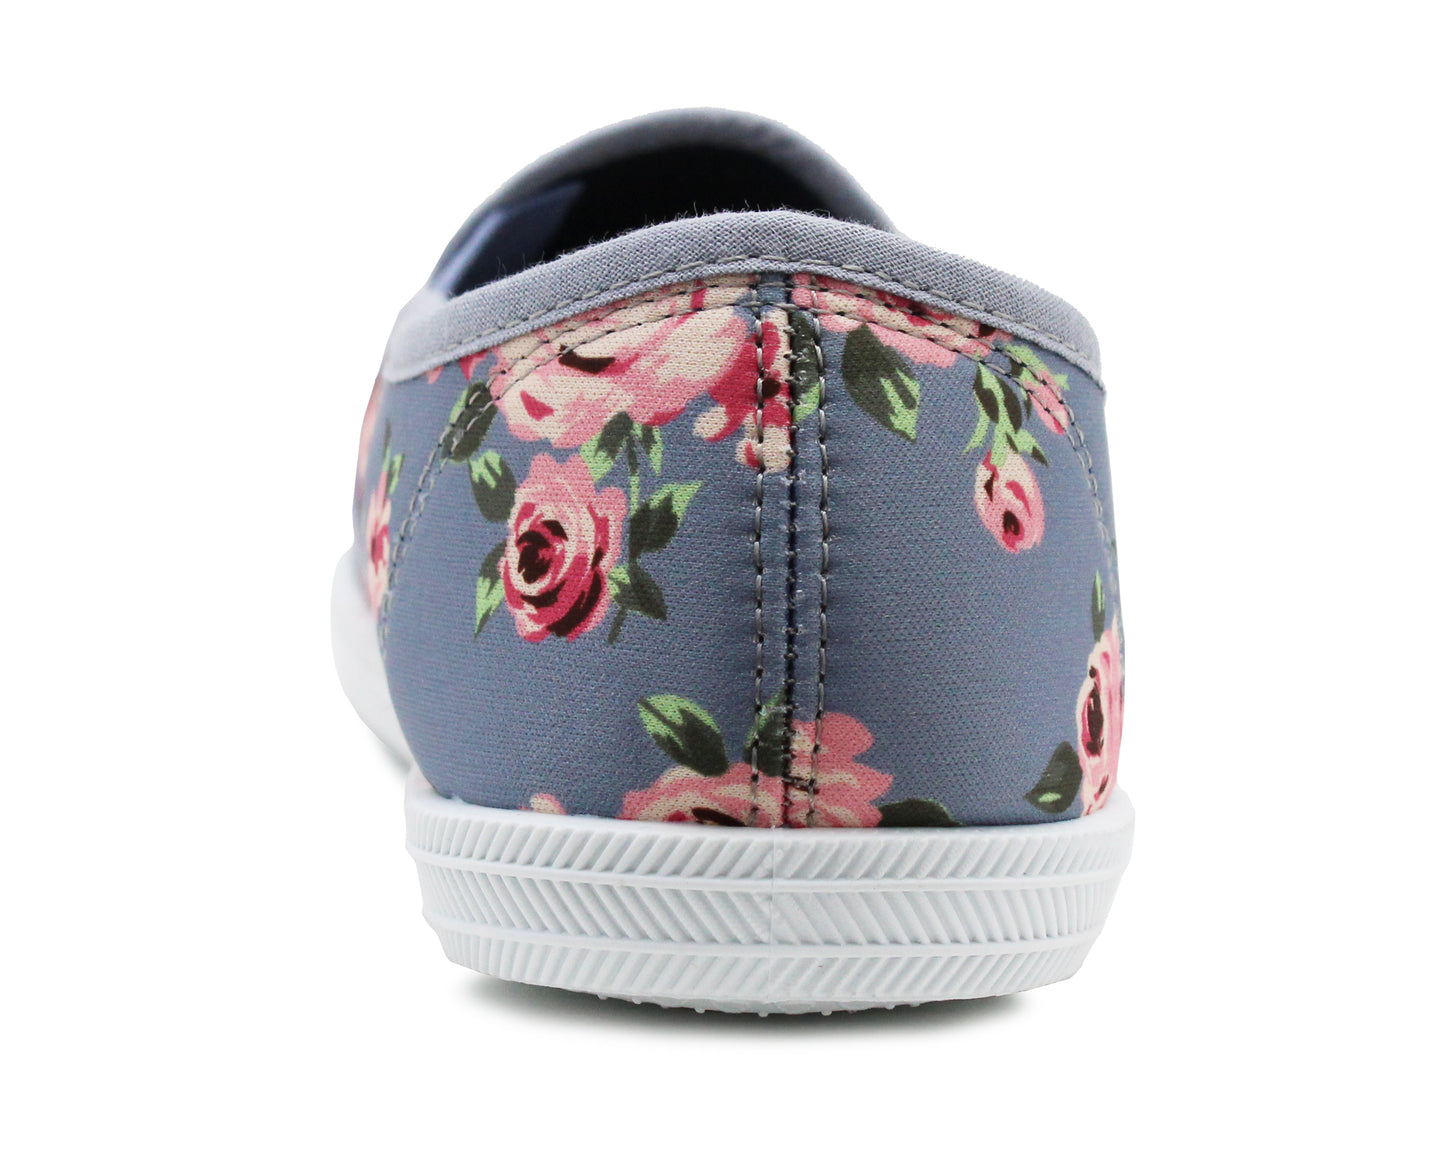 Womens Blue Floral Canvas Slip On Plimsolls Flat Pumps Casual Loafer Trainers